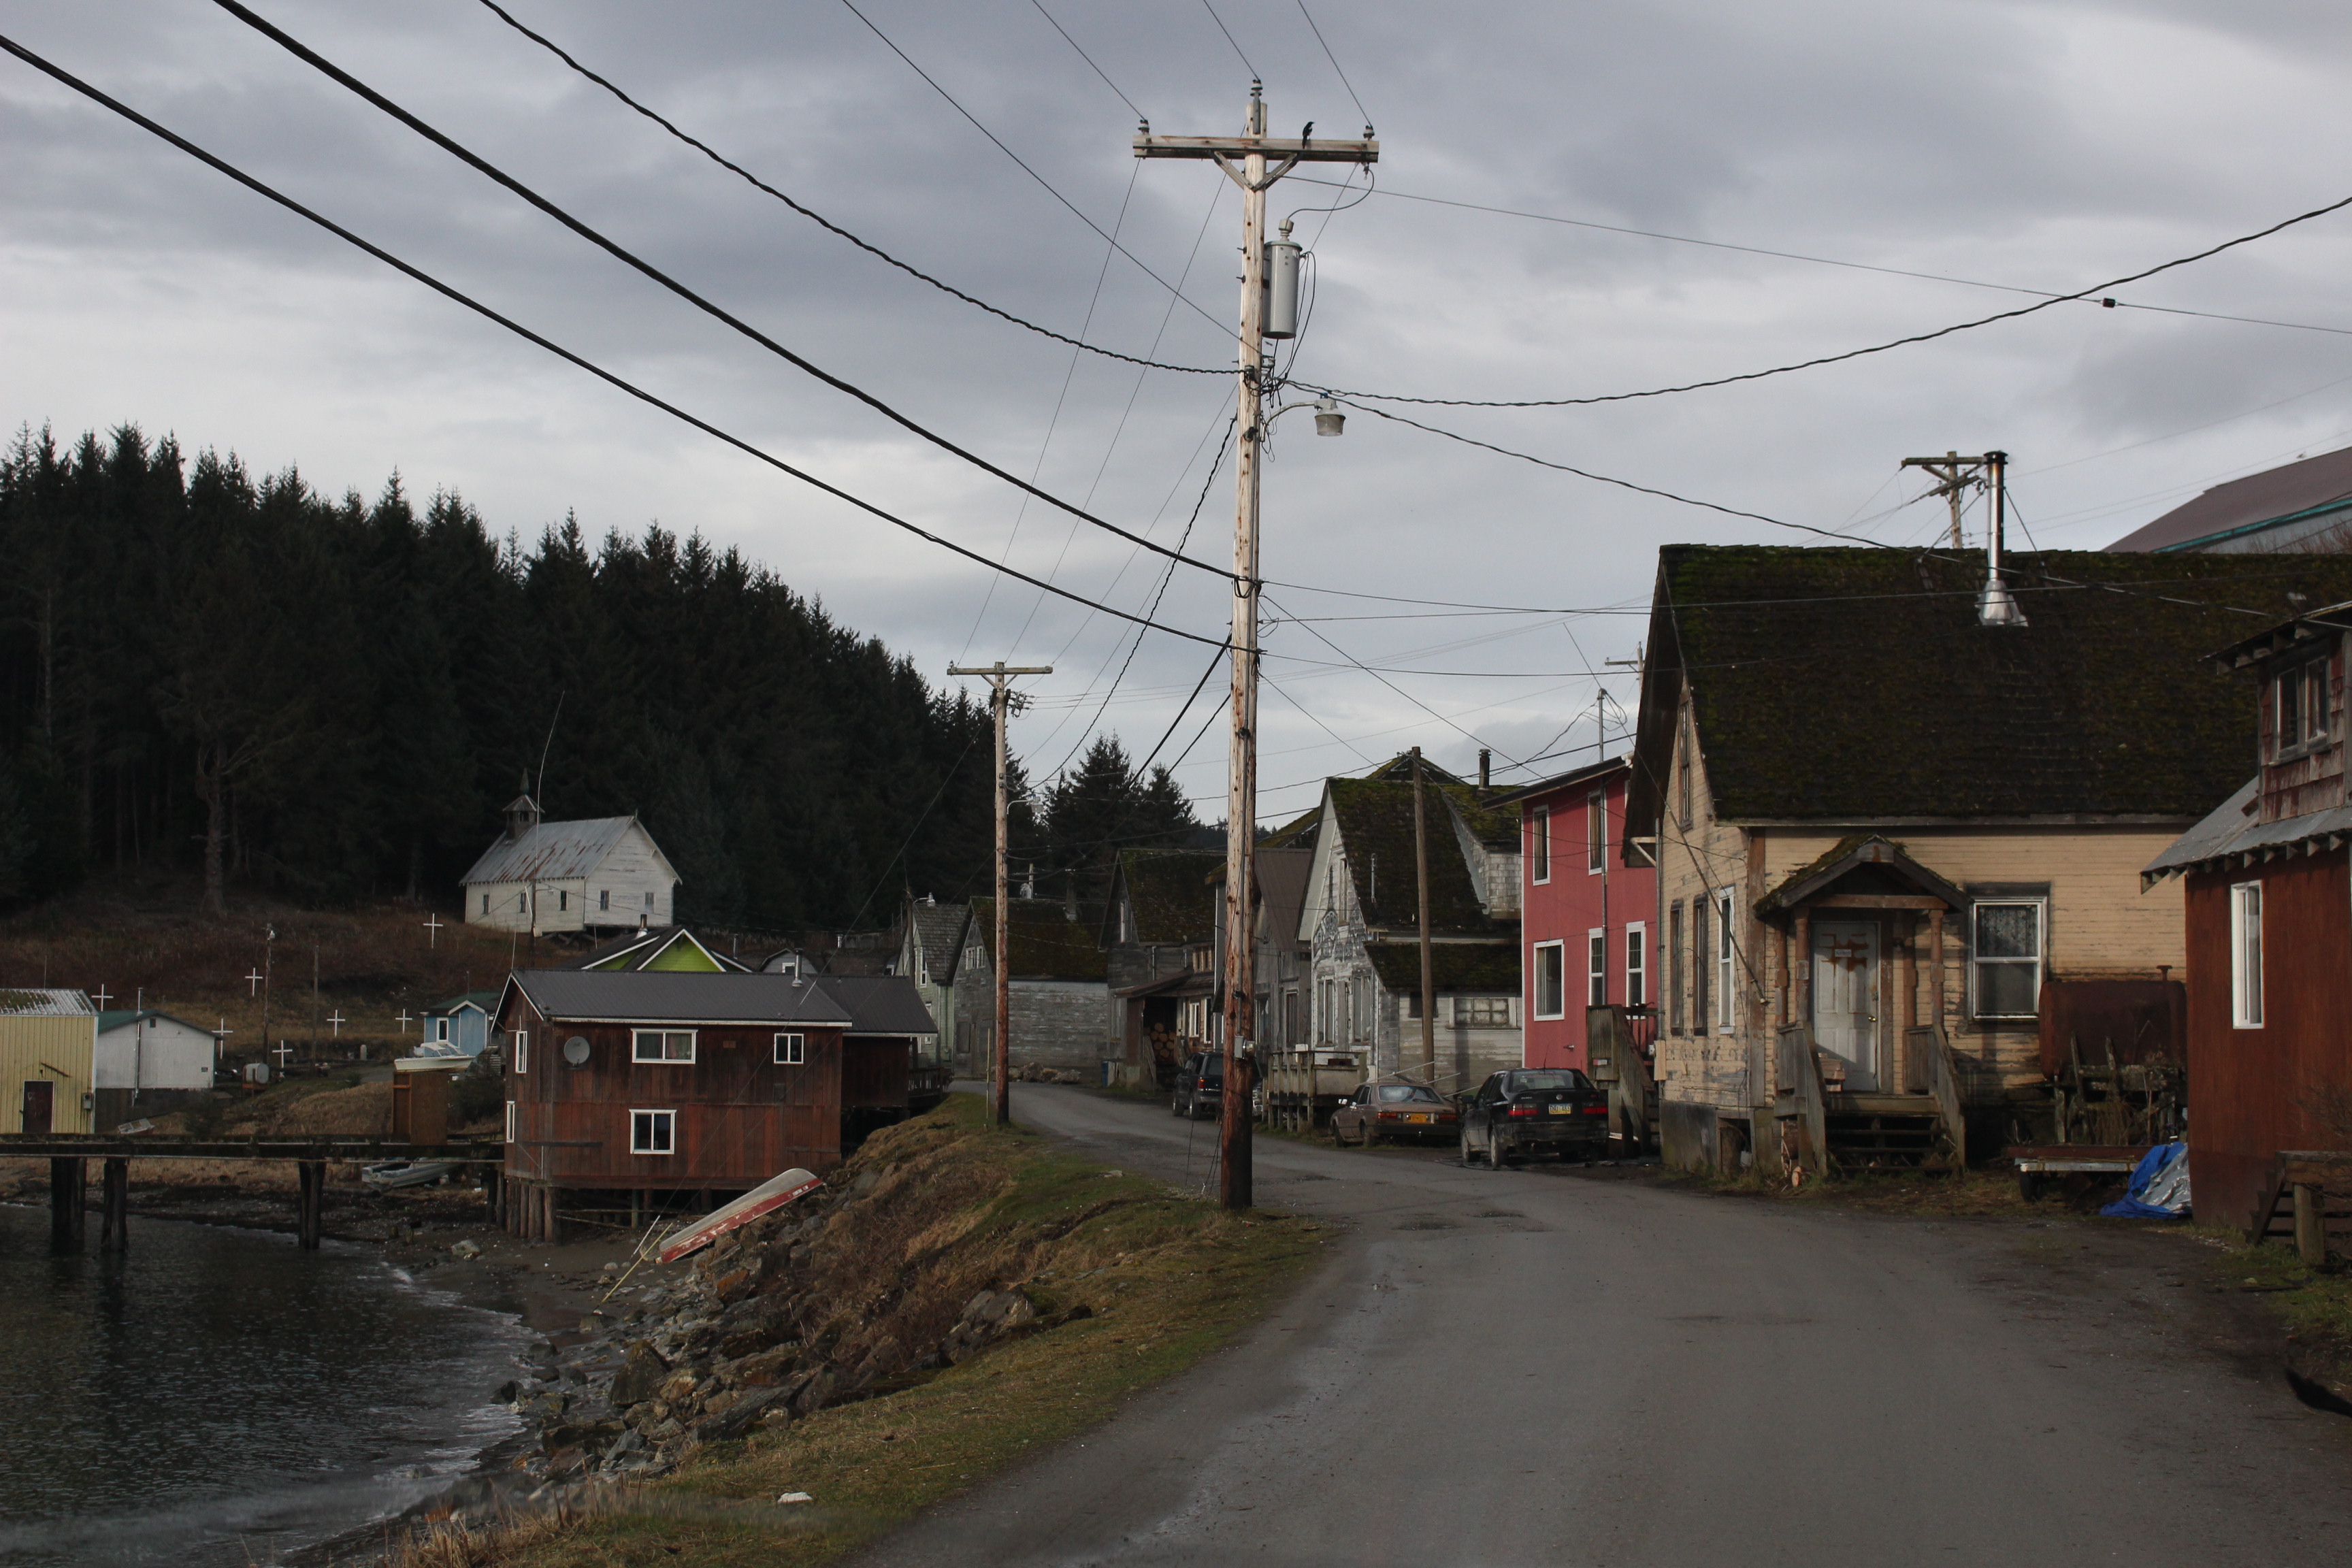 The village of Angoon is the home to about 400 people. (Photo by Elizabeth Jenkins, KTOO - Juneau)